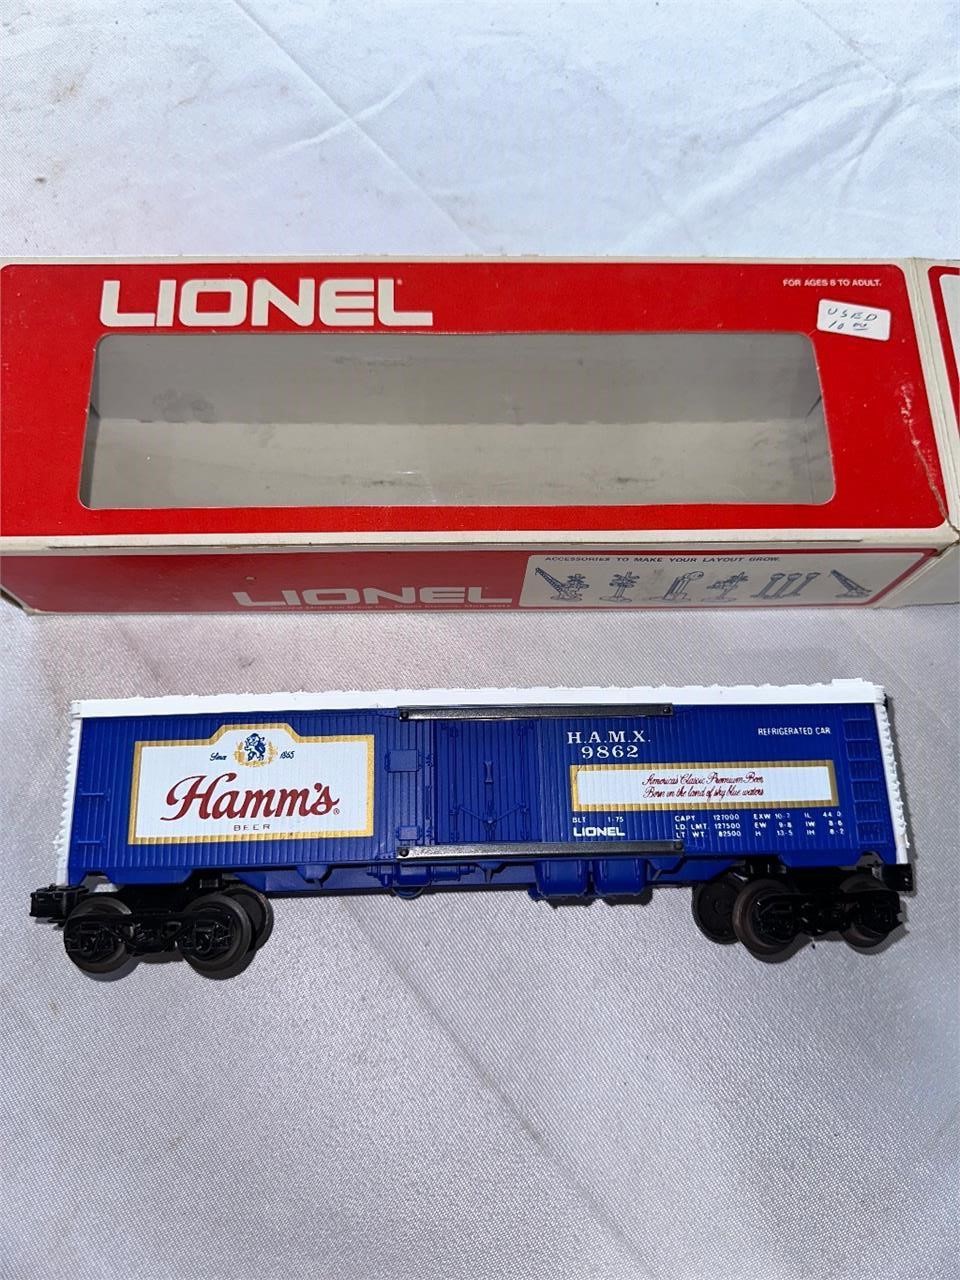 The World of Lionel Trains